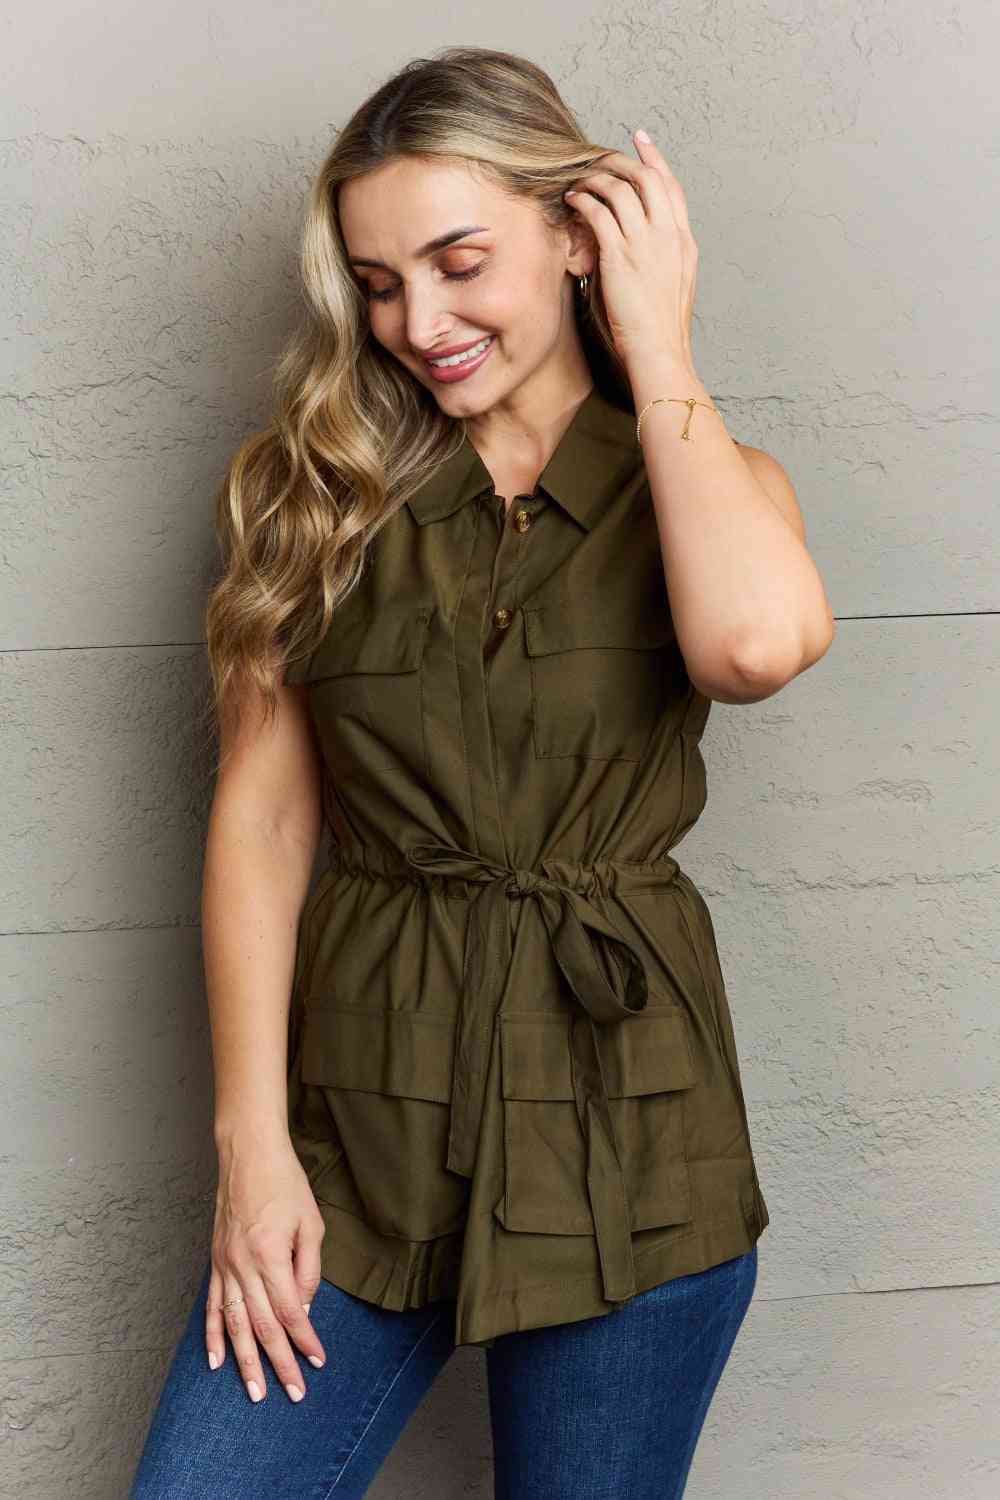 Radiant Allure Sleeveless Collared Button Down Top